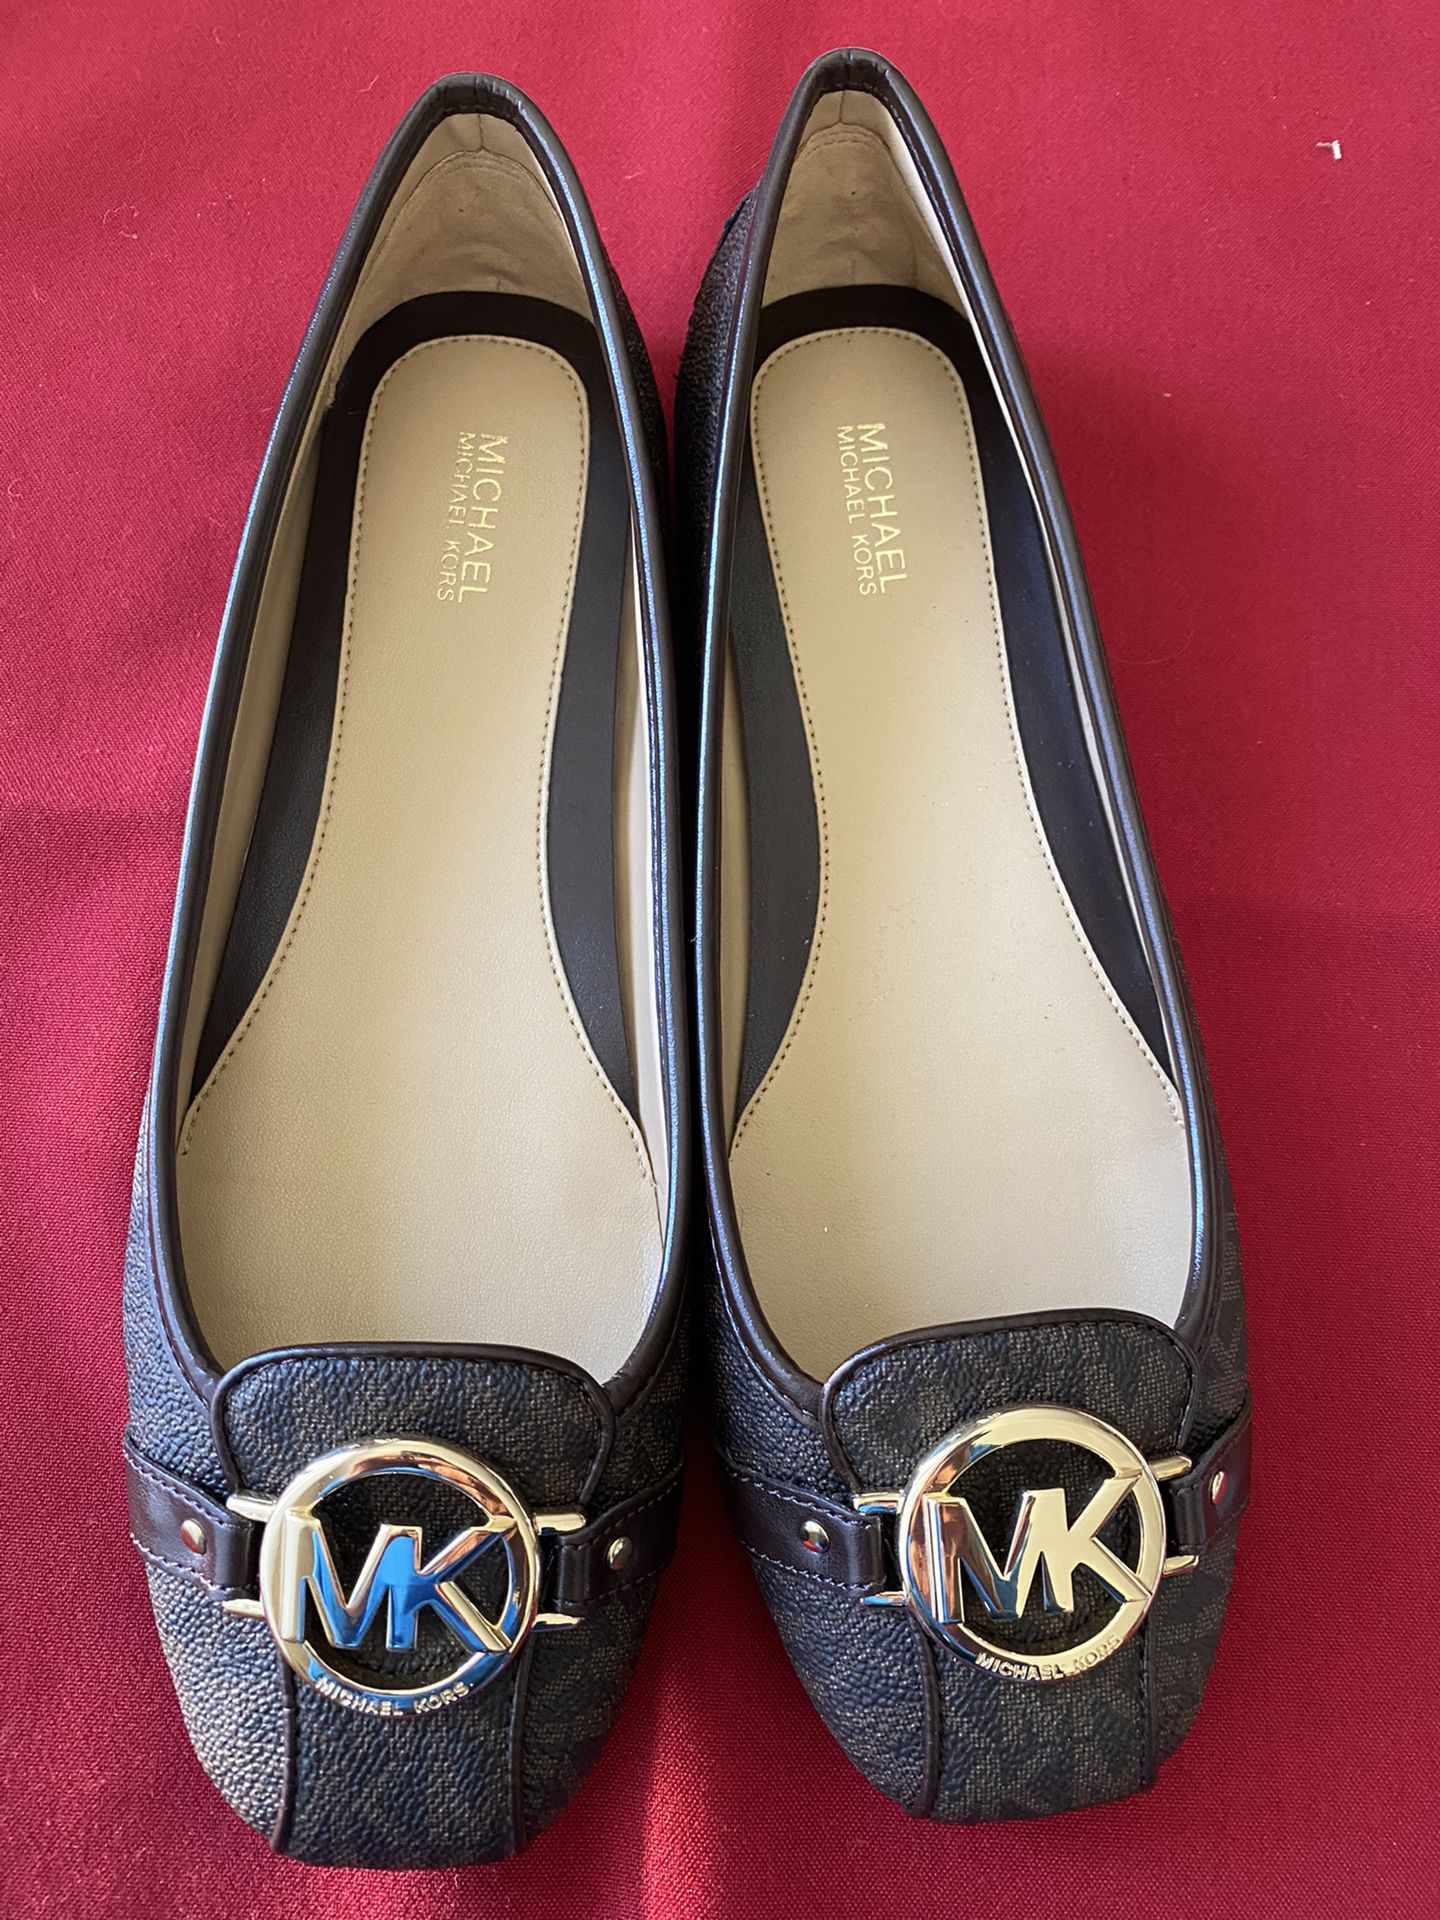 Michael Kors Flat Shoes Women Size 9M New with Box